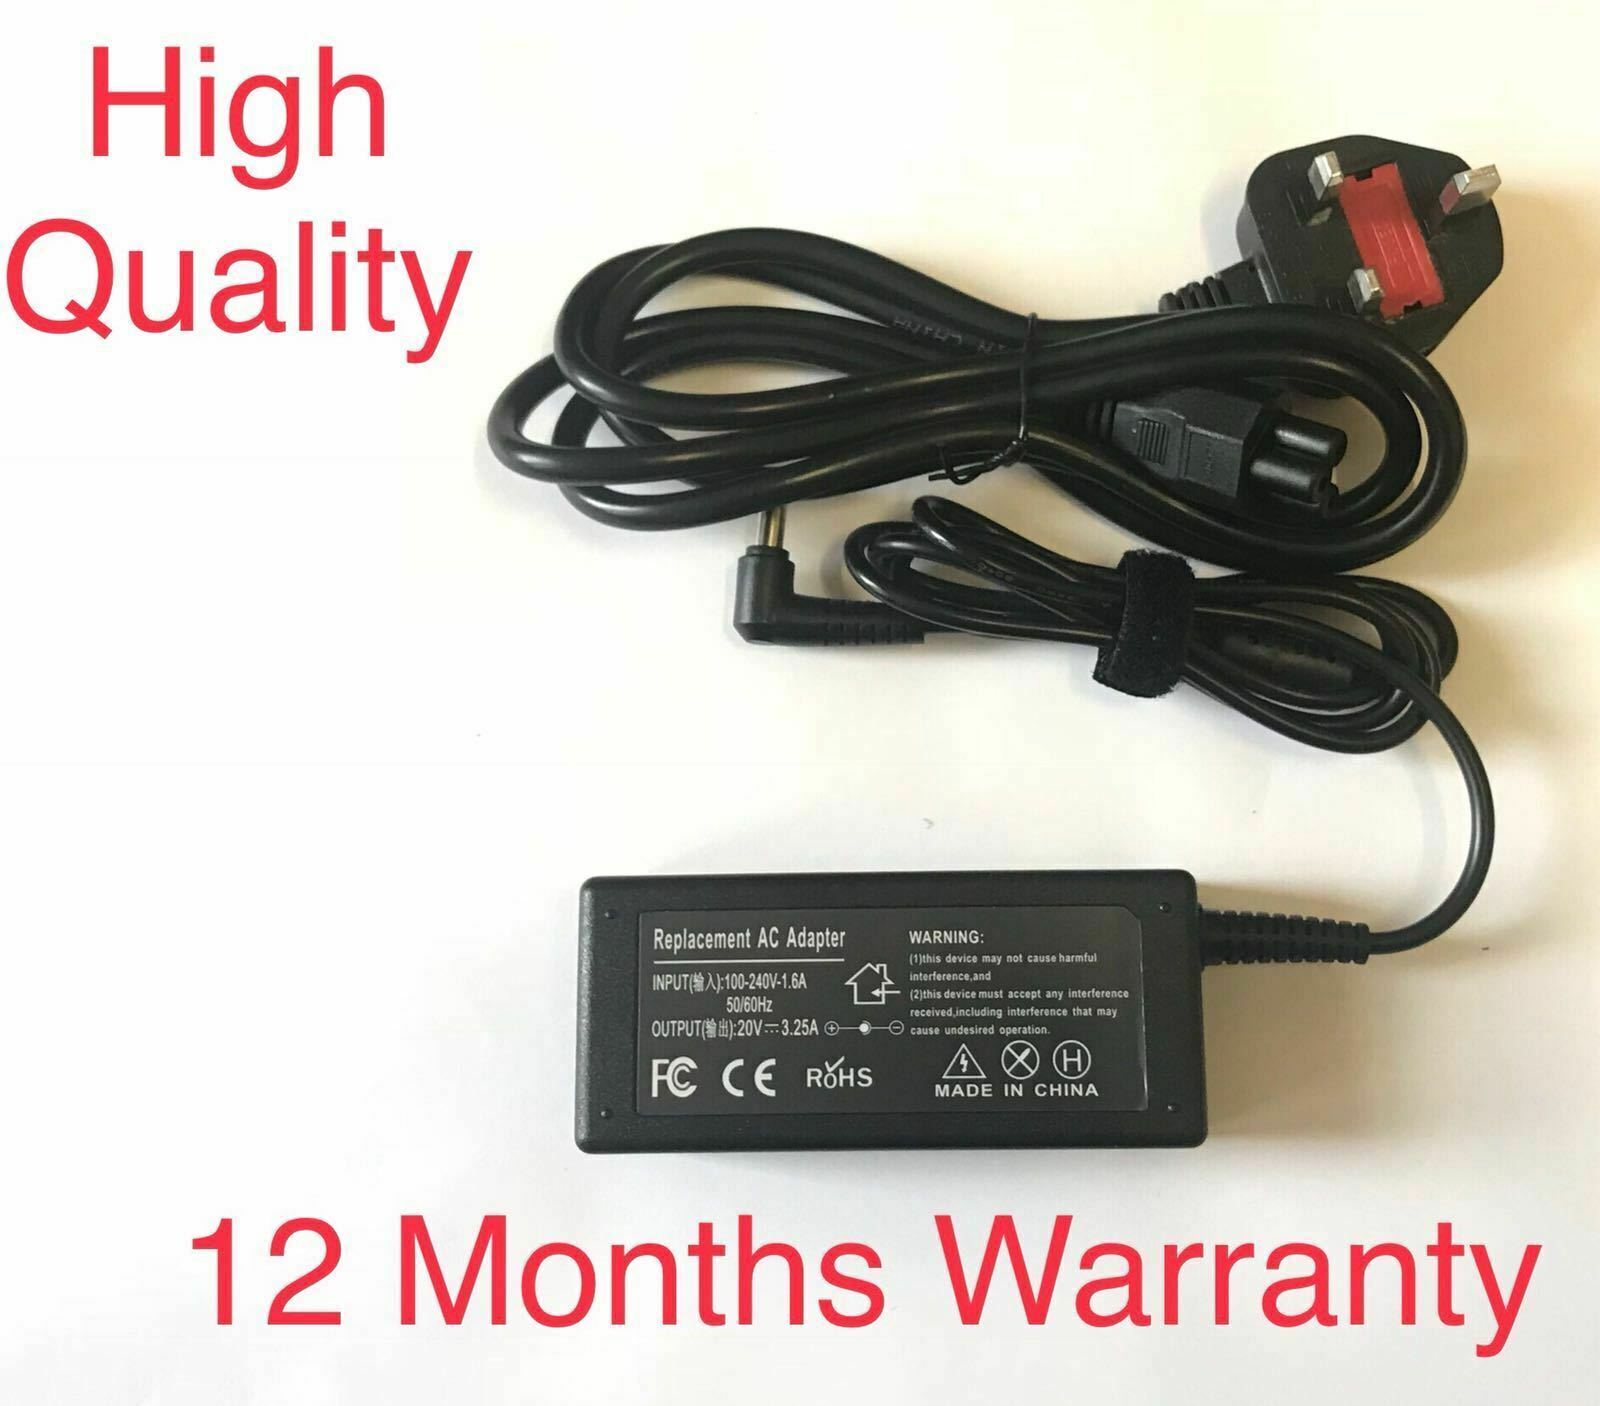 Thermal Printer Power Supply Adapter Zebra Eltron Hitek TLP2844 20V 3.25A Custom Bundle: power cord will fit your cou